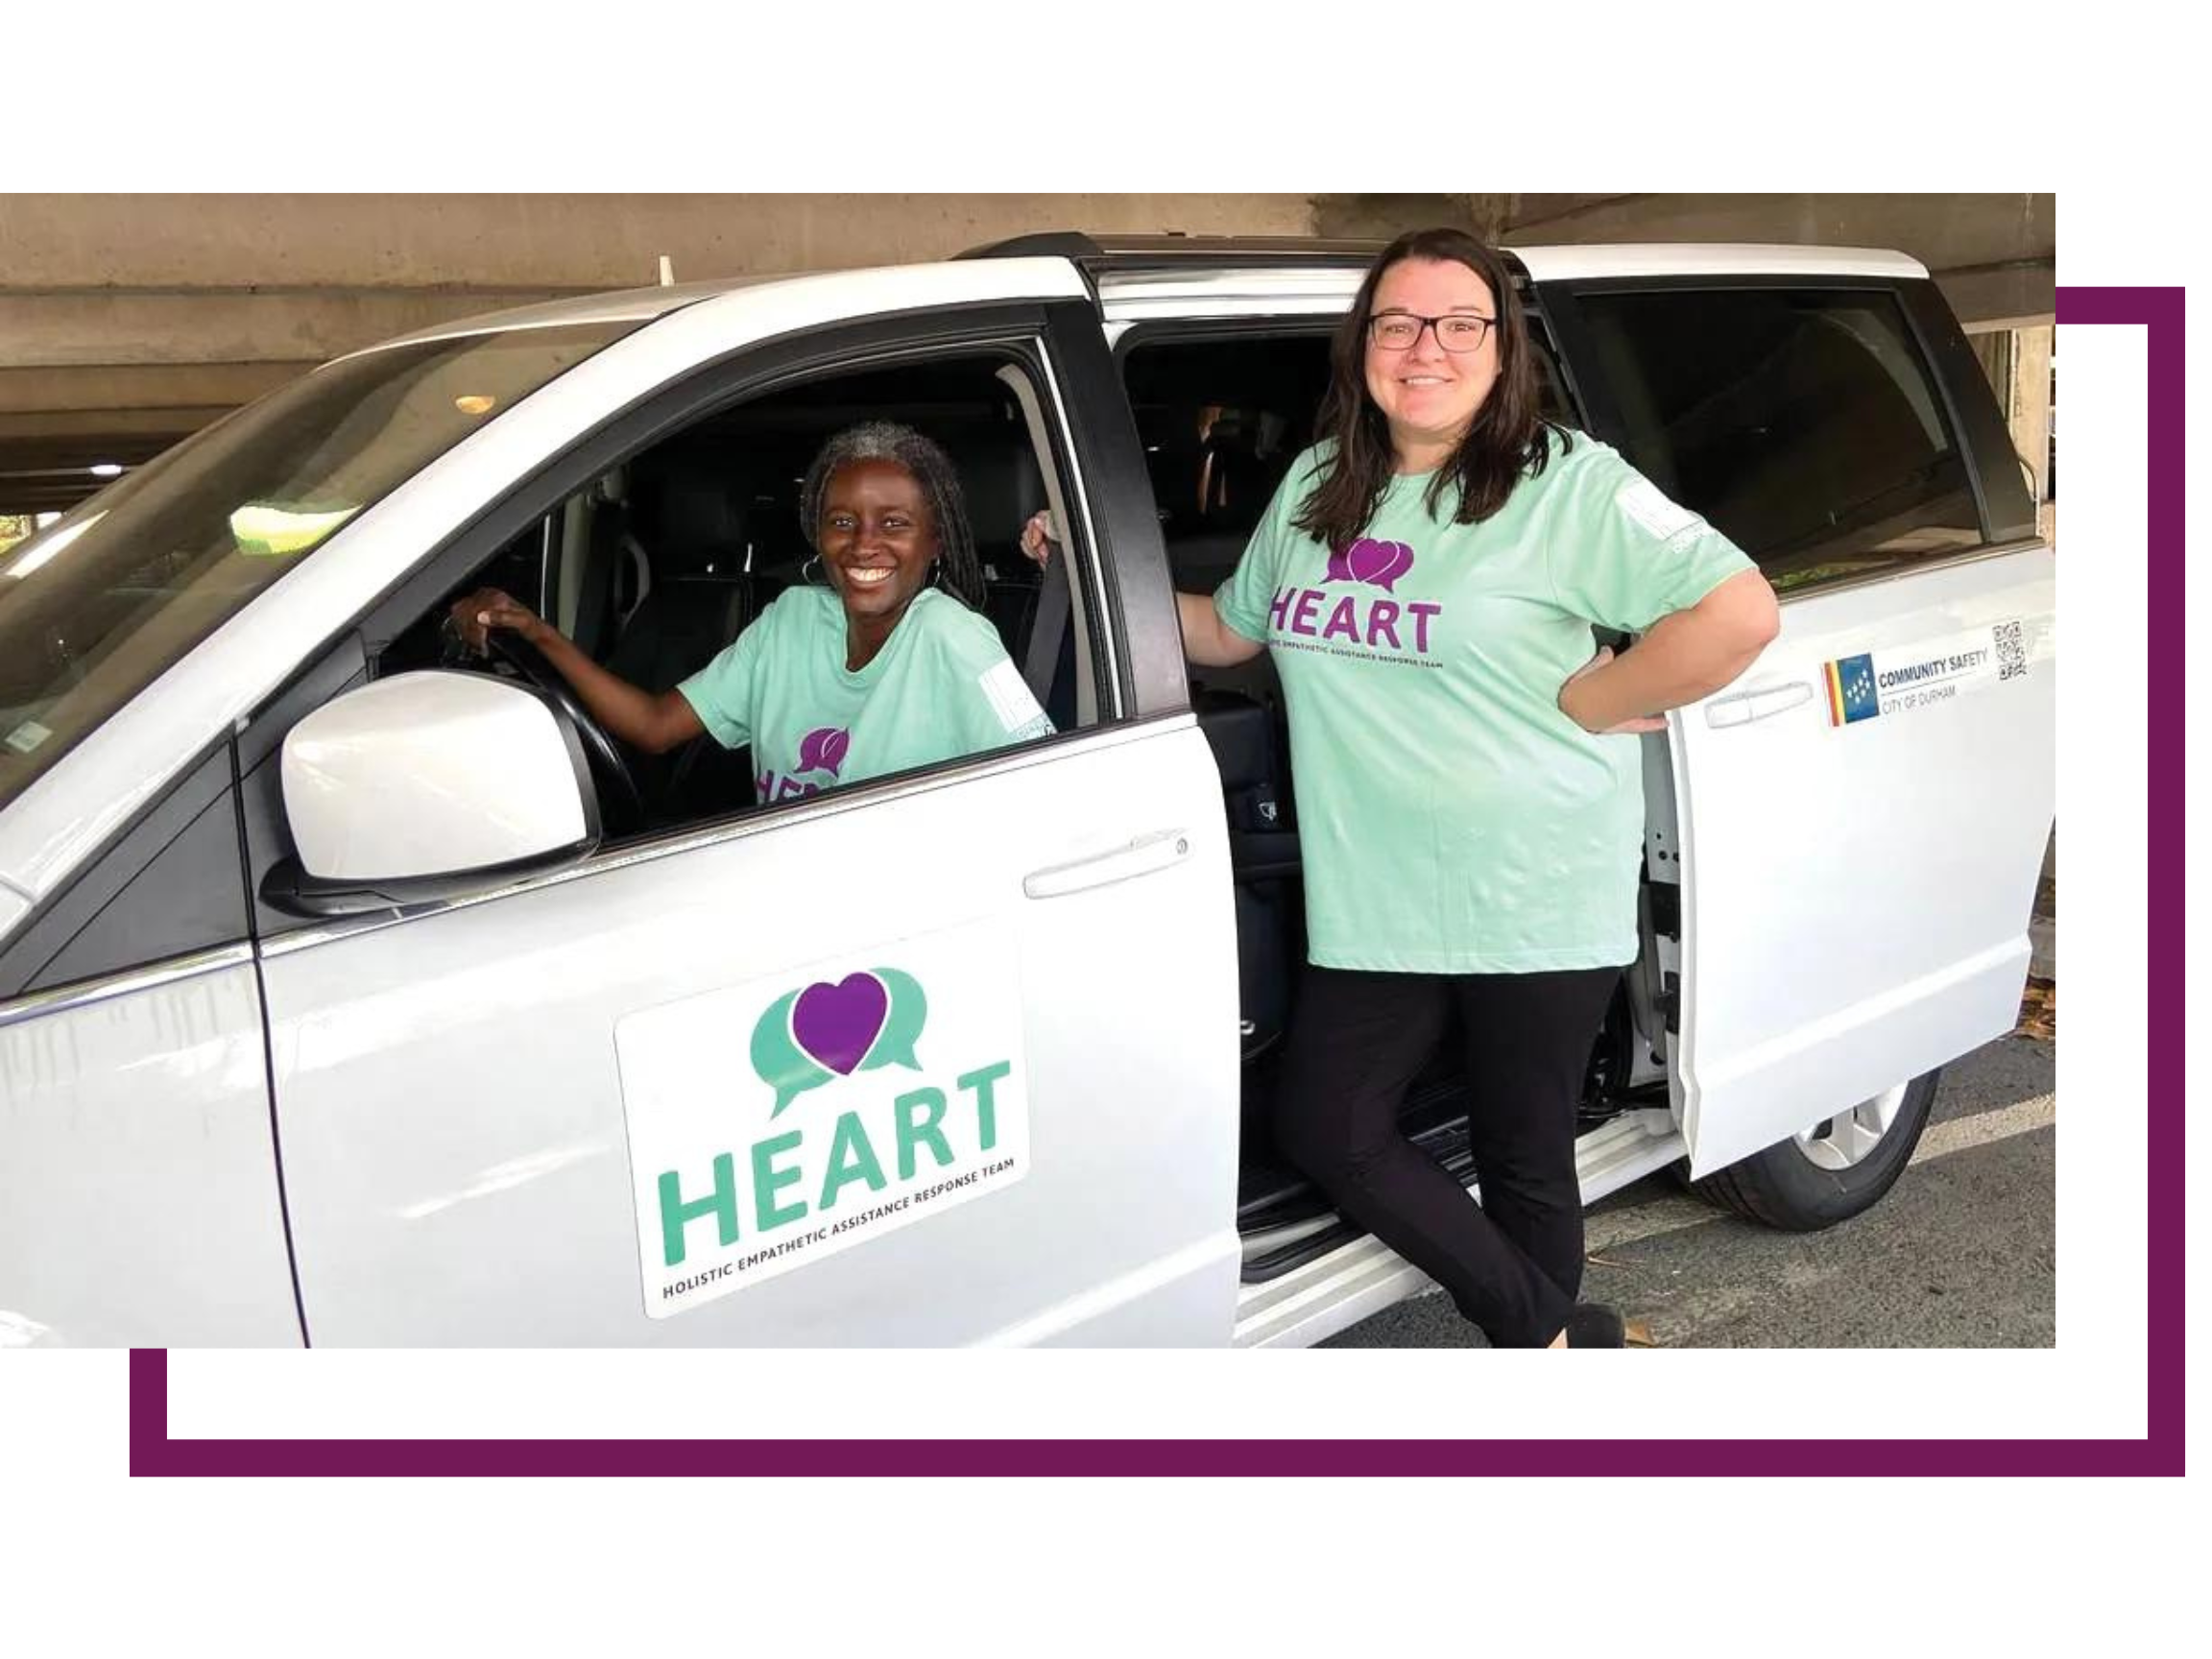 HEART team members pose with vehicle